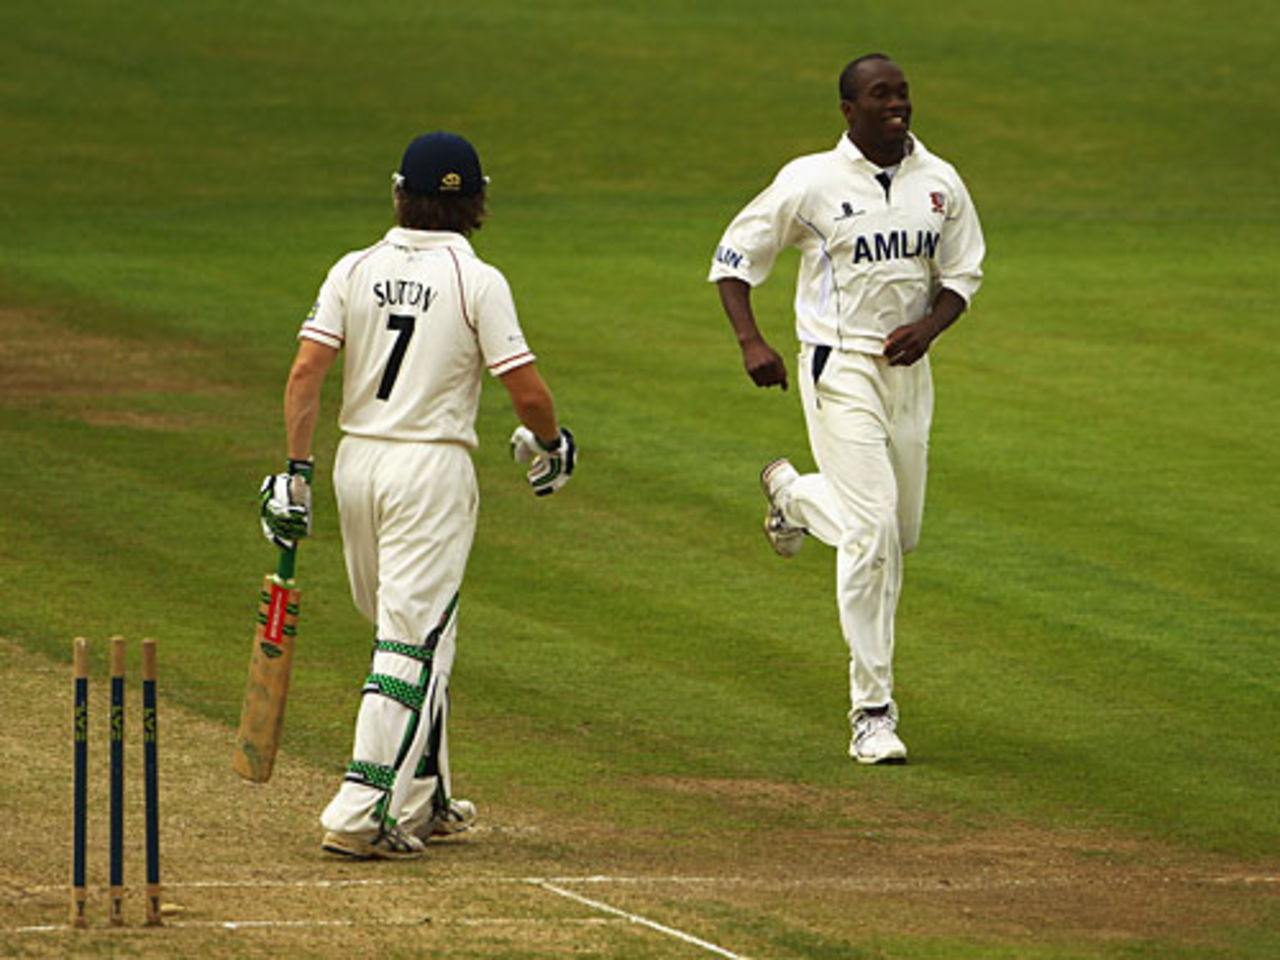 Maurice Chambers removed Luke Sutton early in Lancashire's innings, Lancashire v Essex, County Championship, Division One, Old Trafford, May 25, 2010